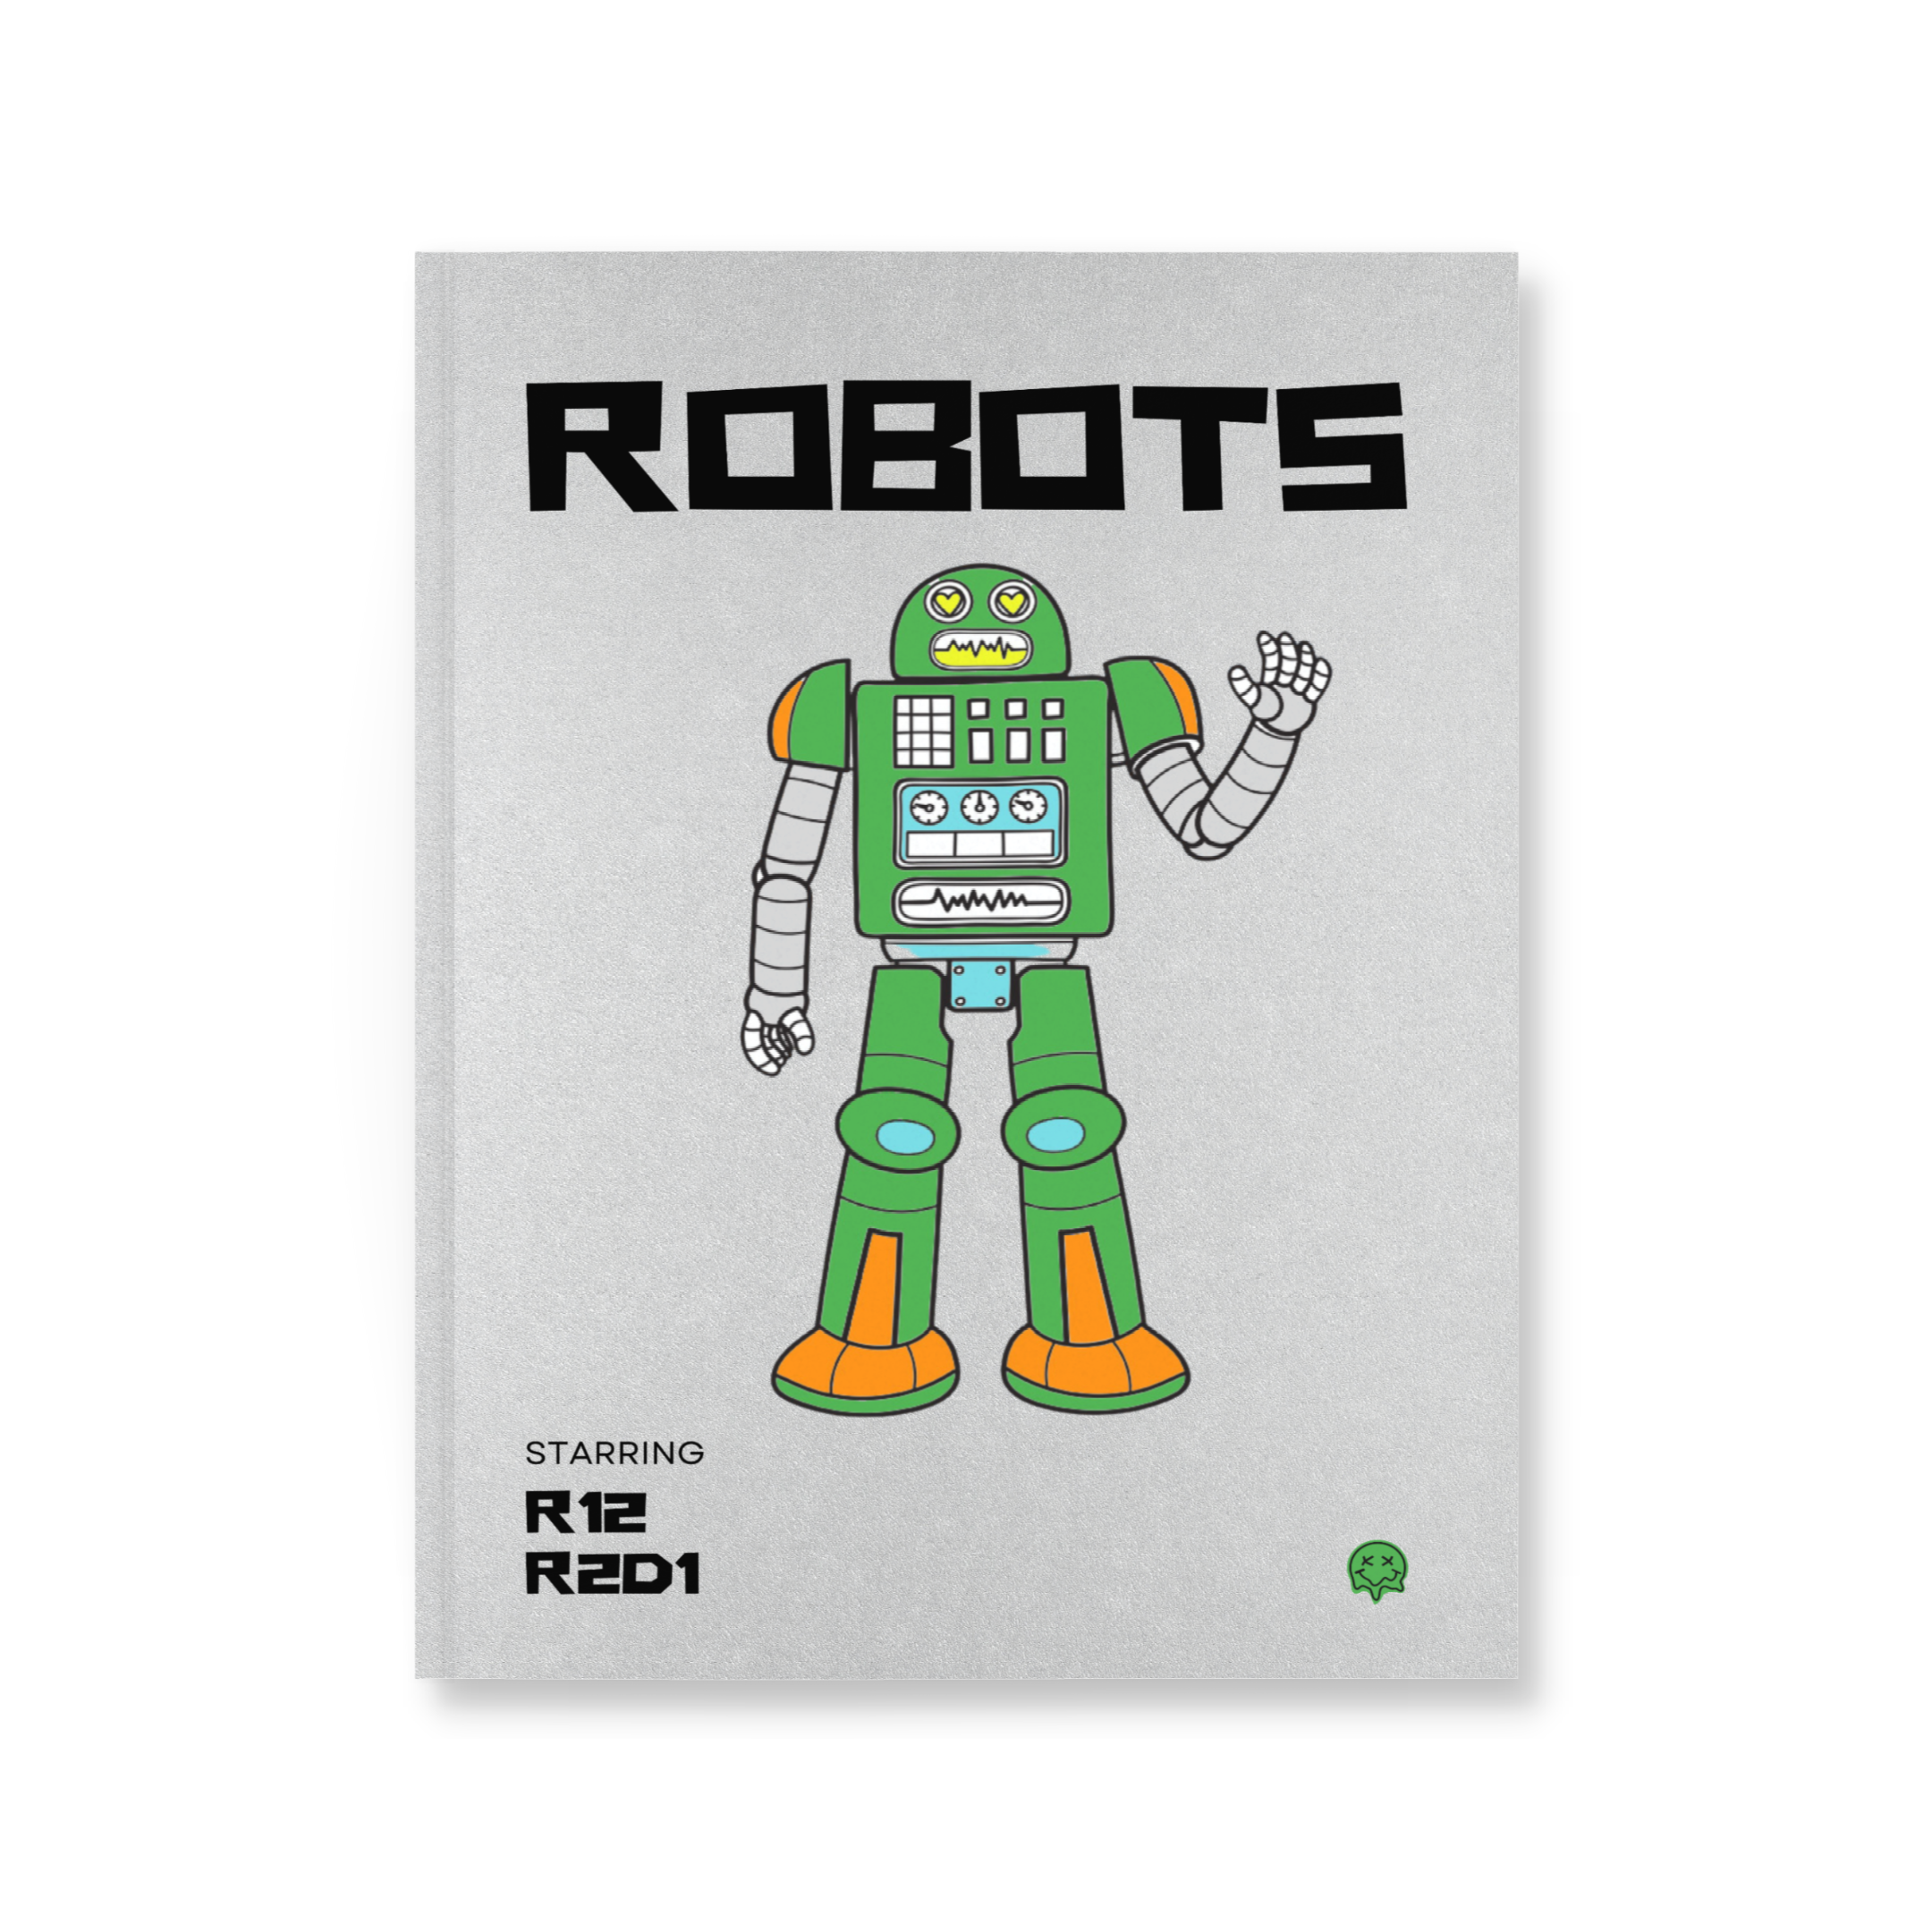 Fantastic Robot Coloring Book For Kids Ages 5-7: Explore, Fun With